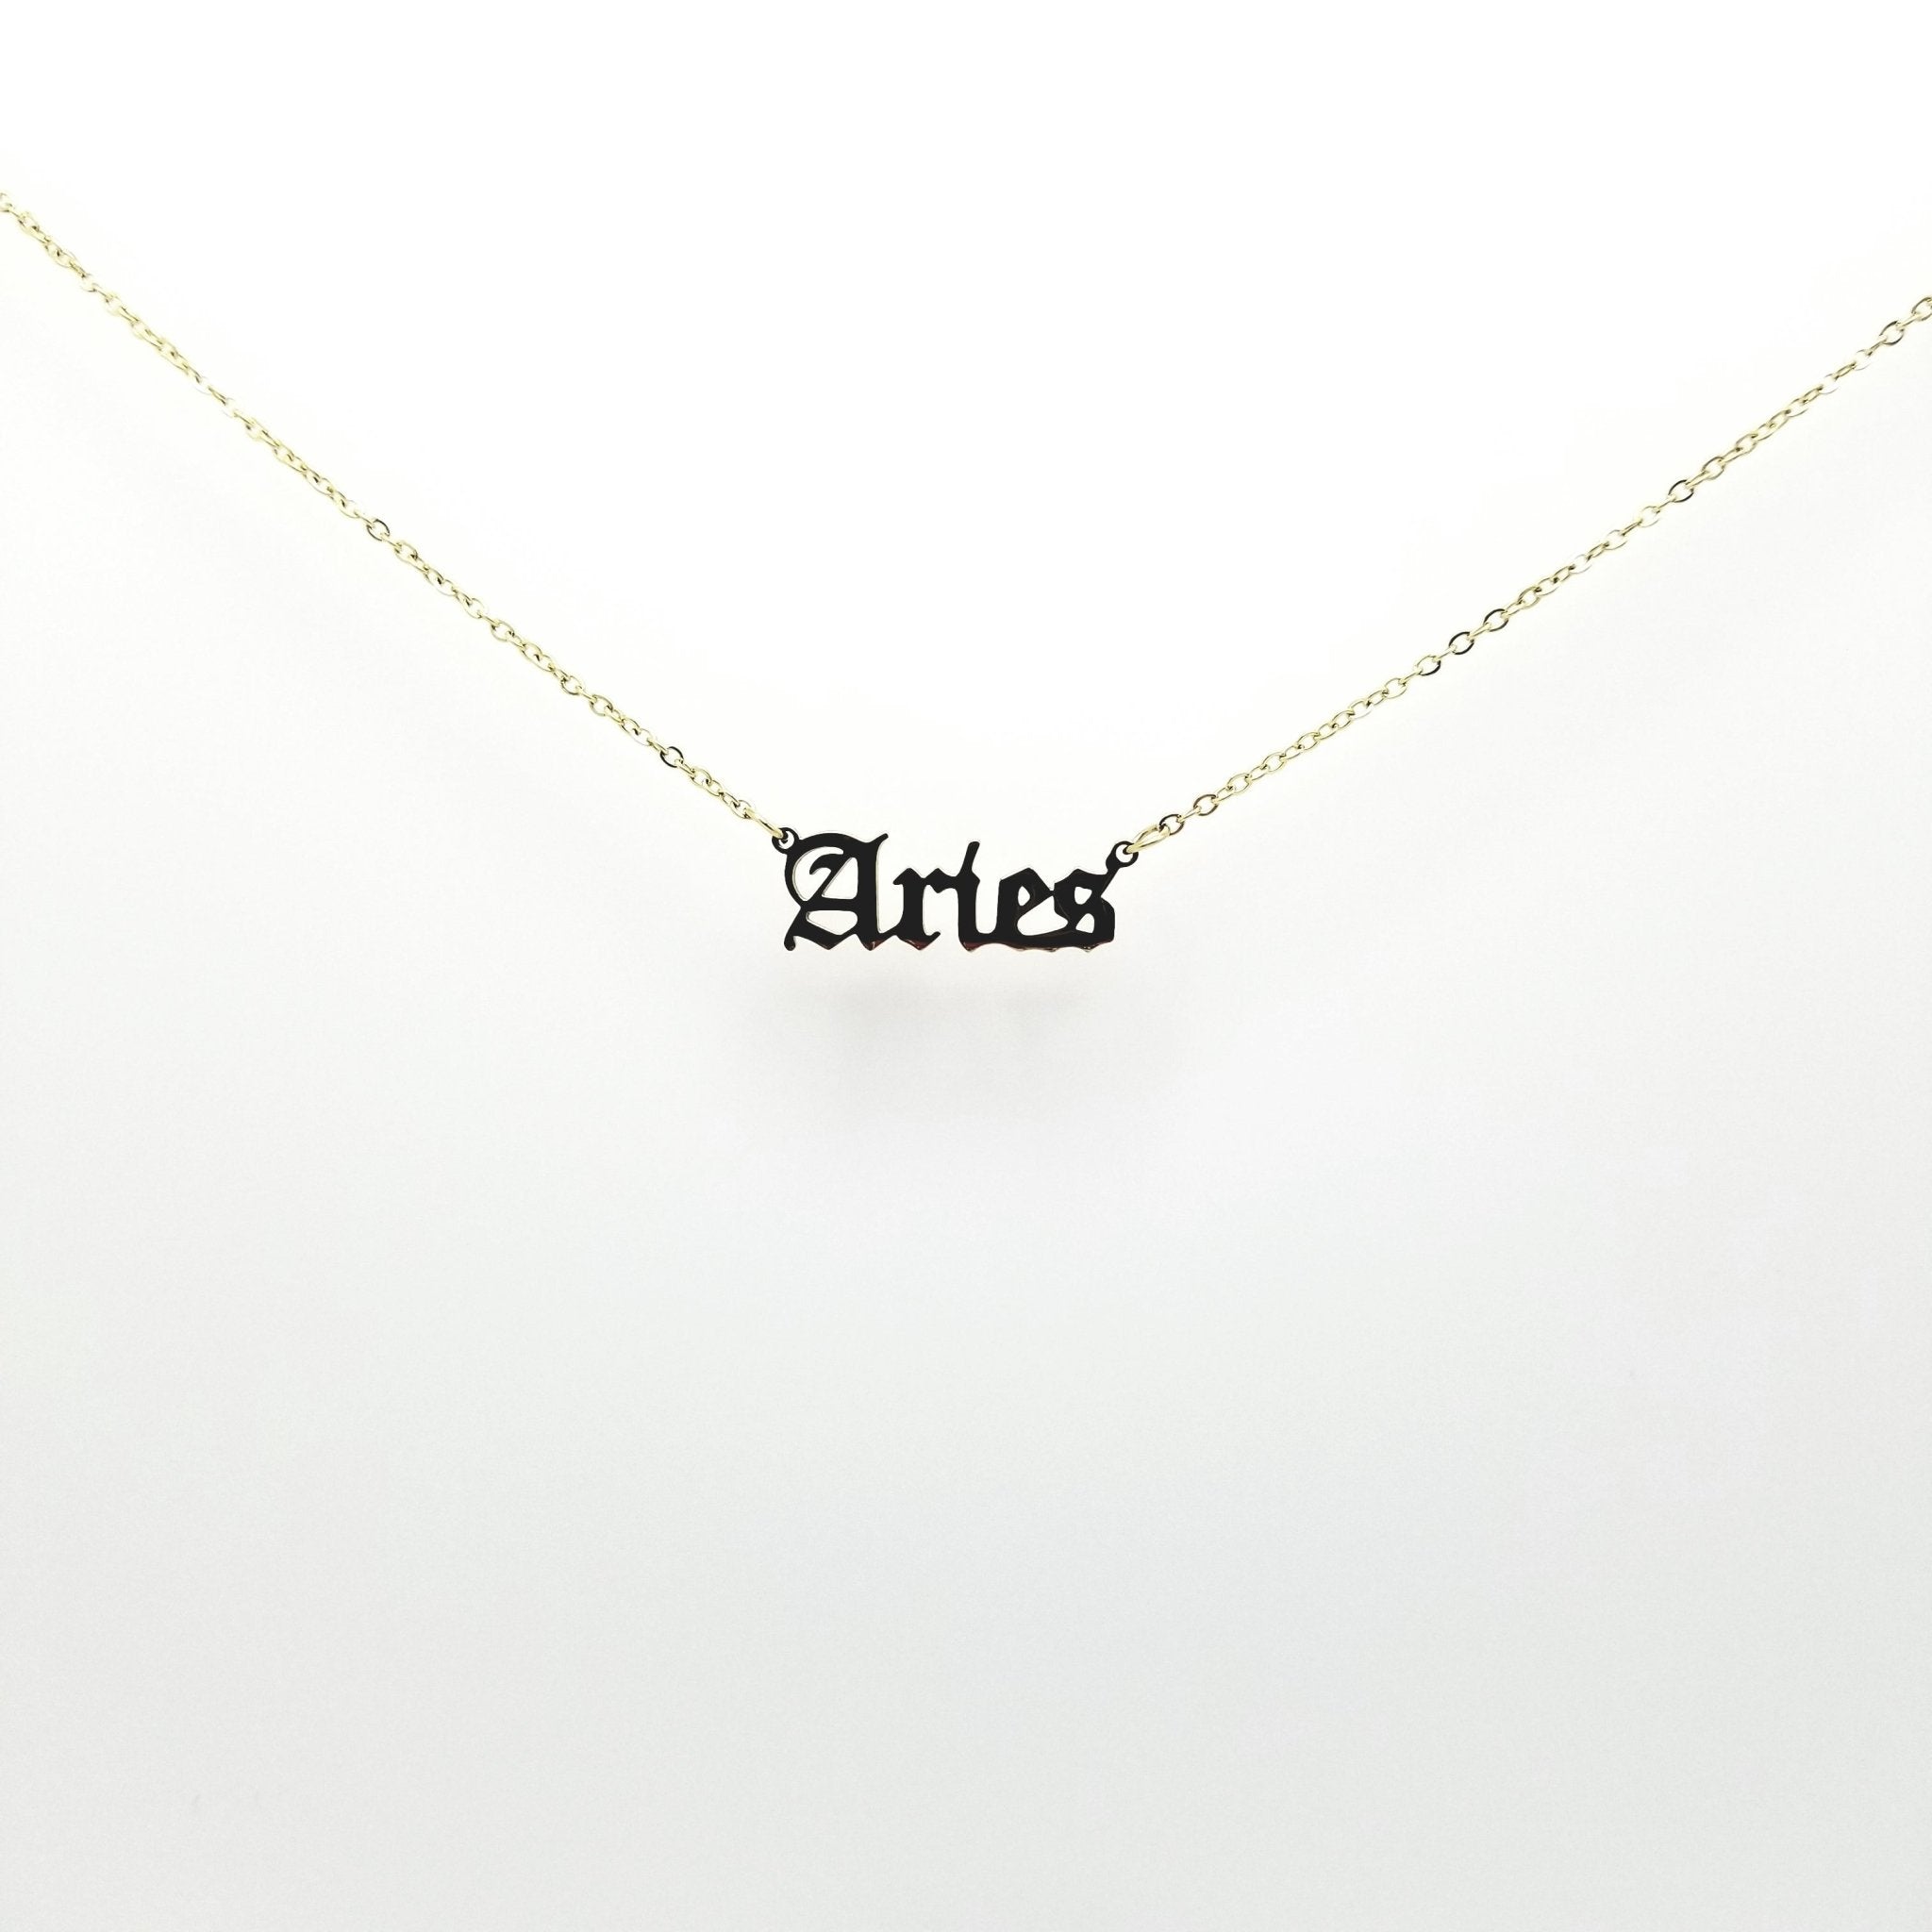 Aries Zodiac Name Necklaces: 18k Gold Plated - Spiral Circle